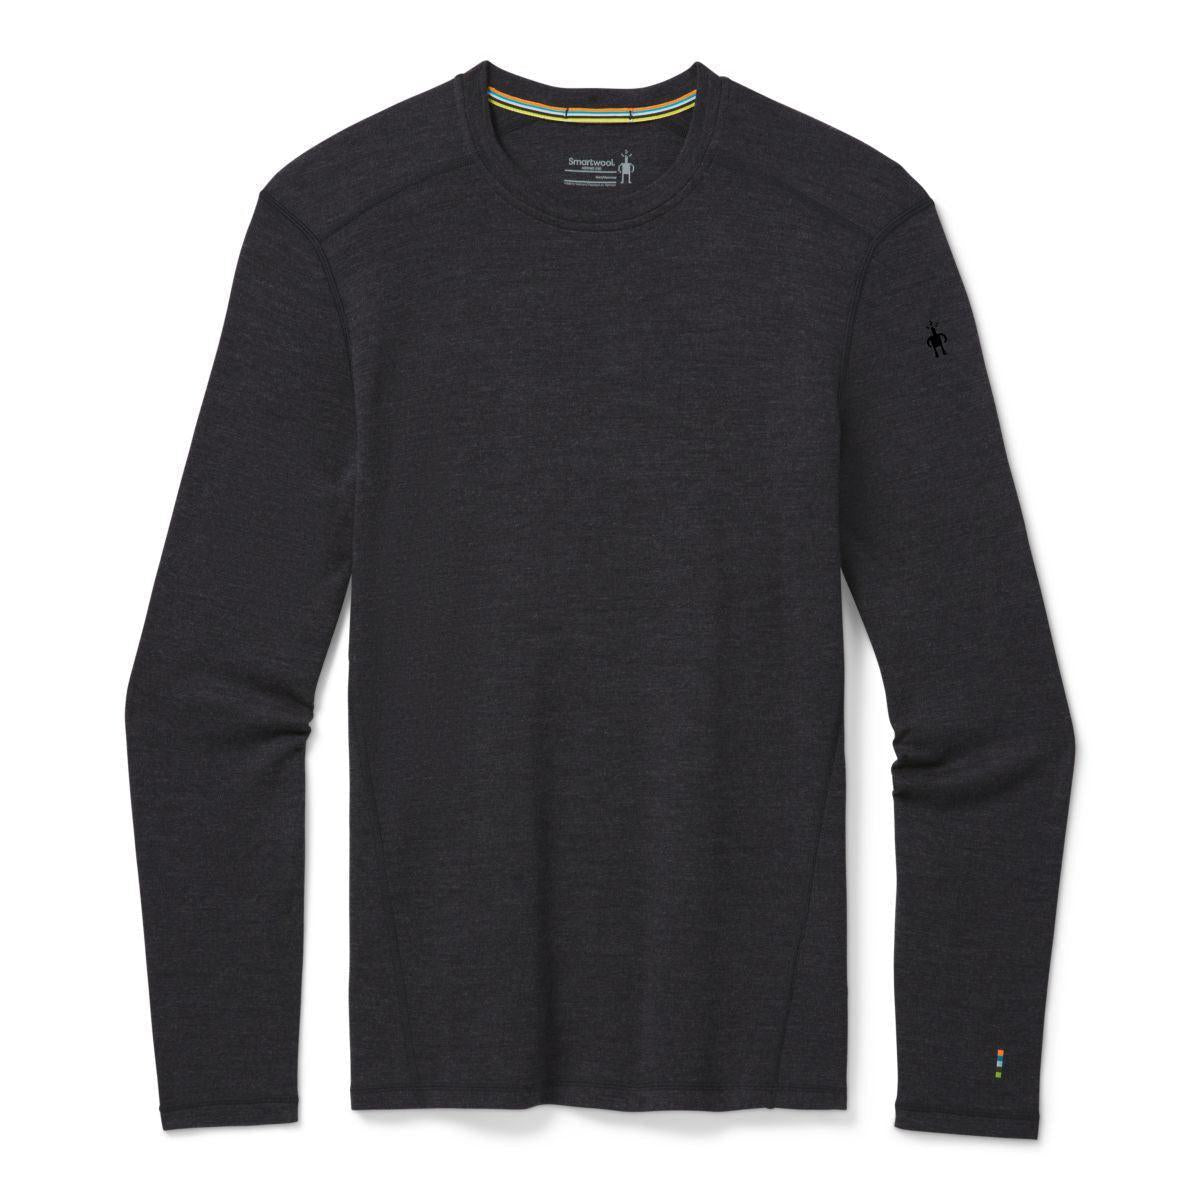 Smartwool-Men's Smartwool Classic Thermal Merino Base Layer Crew-Charcoal Heather-Pacers Running